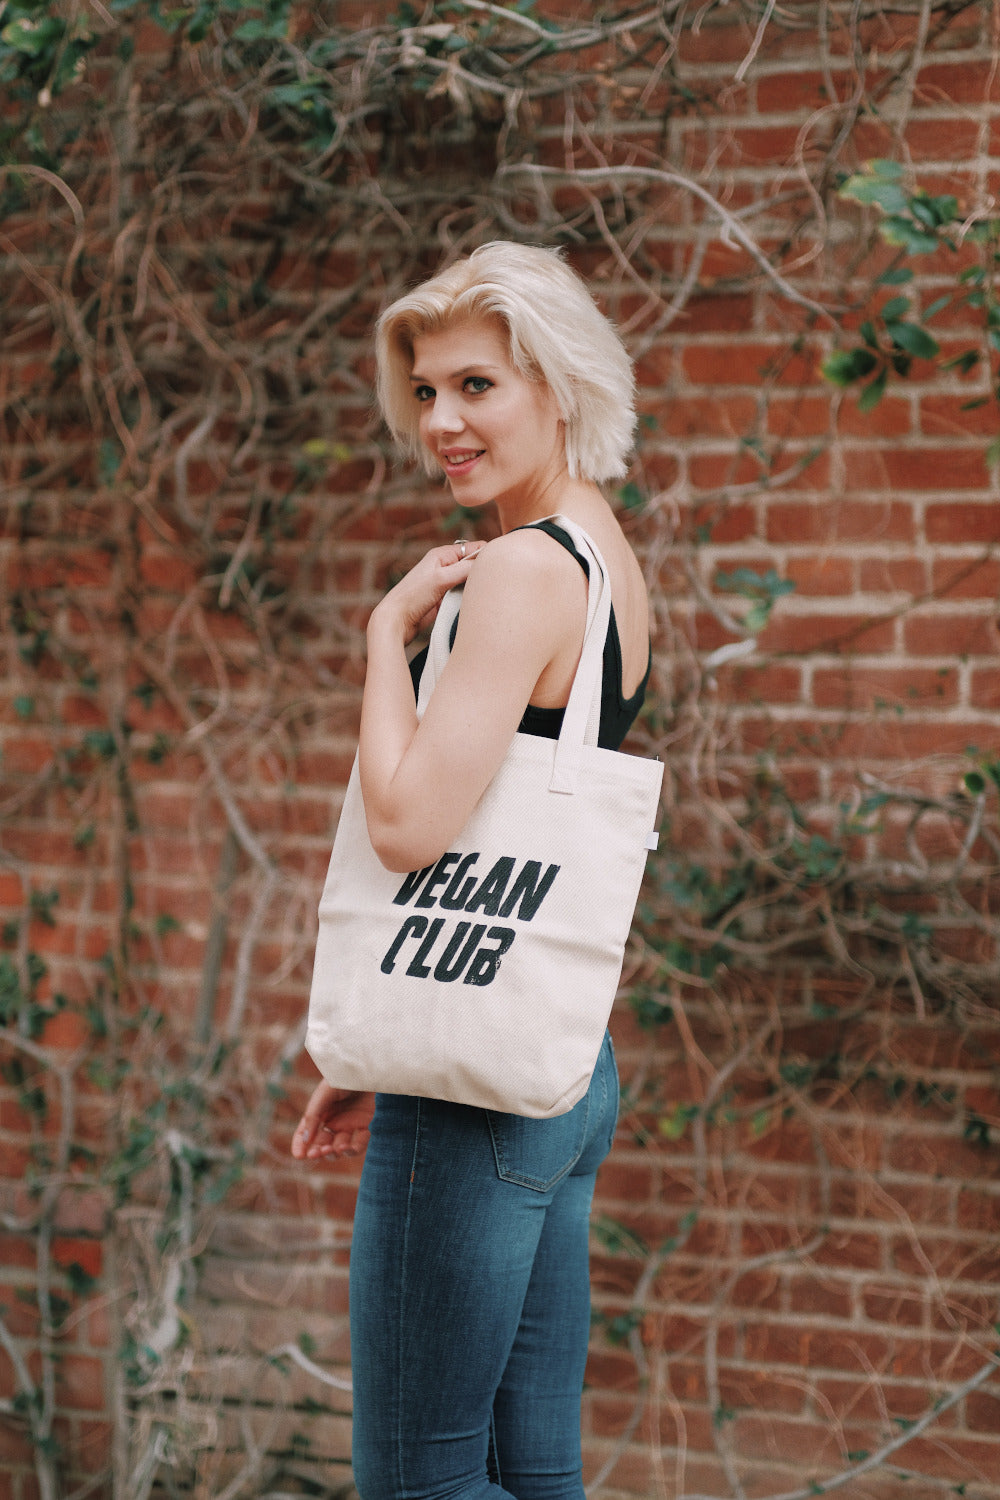 Tote Bag "Compassion for Every Being!" collab Vegan Club with Mary Kollende